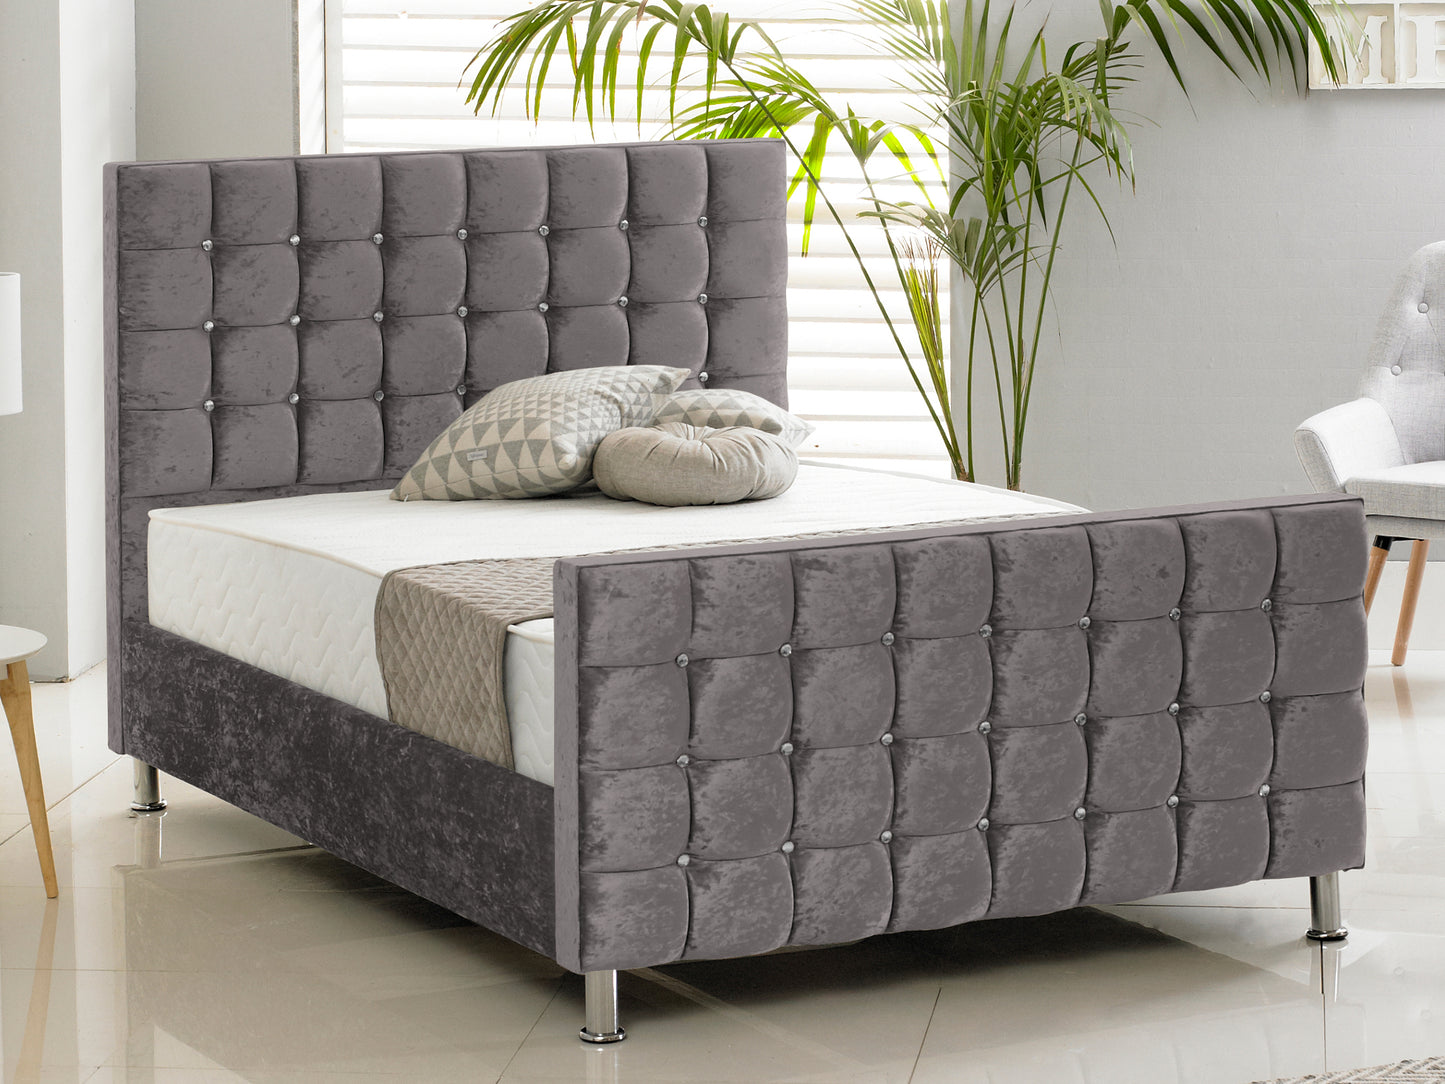 Cube Luxury Bed Frame in Crushed Steel